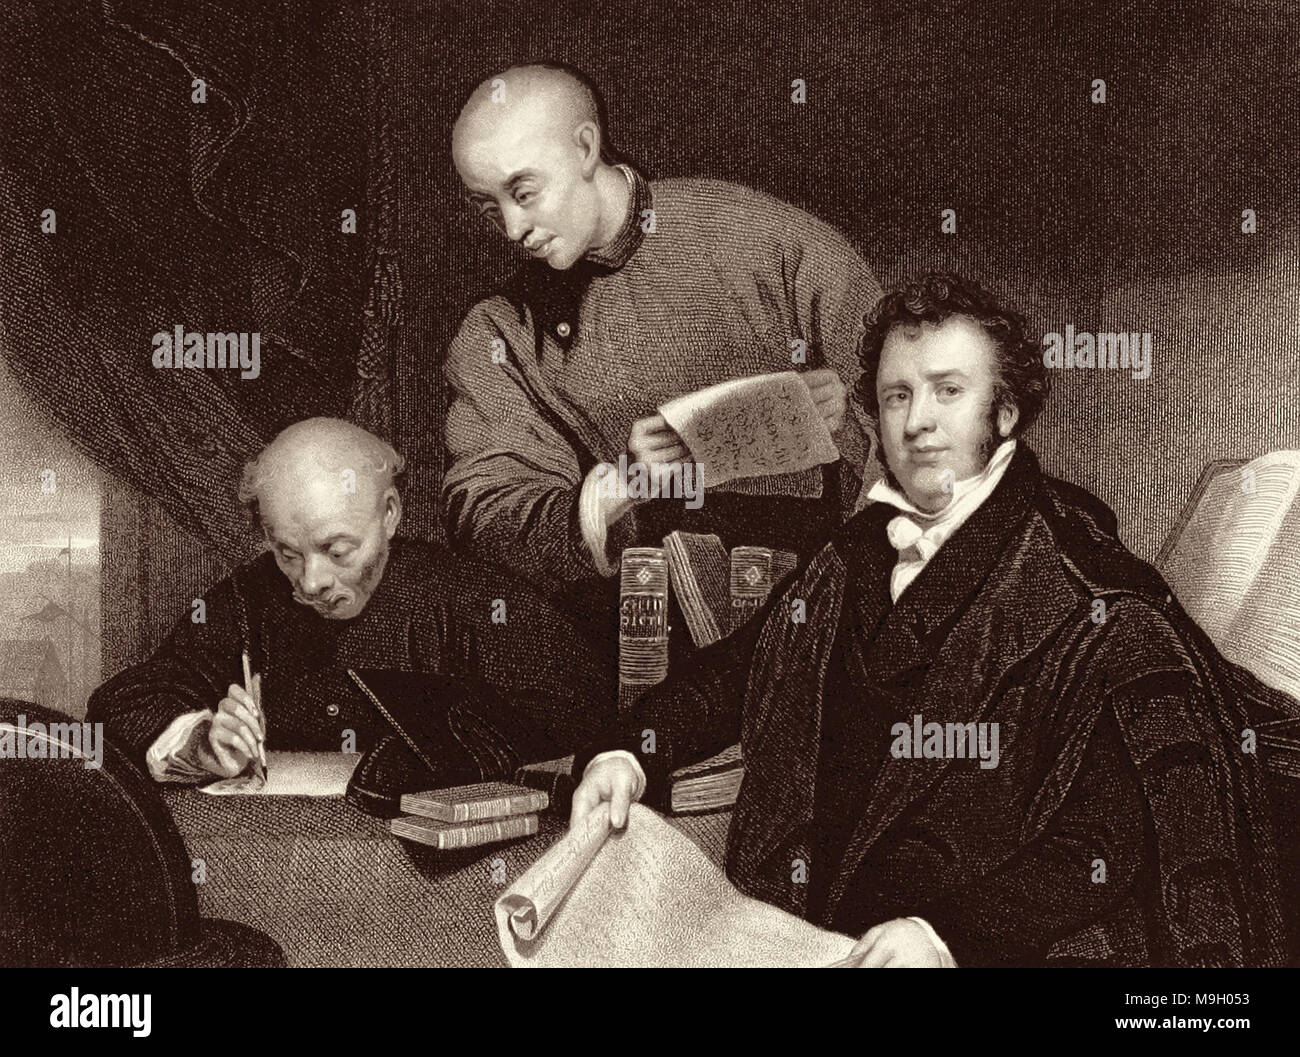 Li Shigong (left), Chen Laoyi (center) and pioneering Protestant missionary Robert Morrison (right) translating the Bible into Chinese. This engraving by W. Holl, c1850s, is based on George Chinnery's now-lost c1828 original painting, which was burned in a fire in 1874. Stock Photo